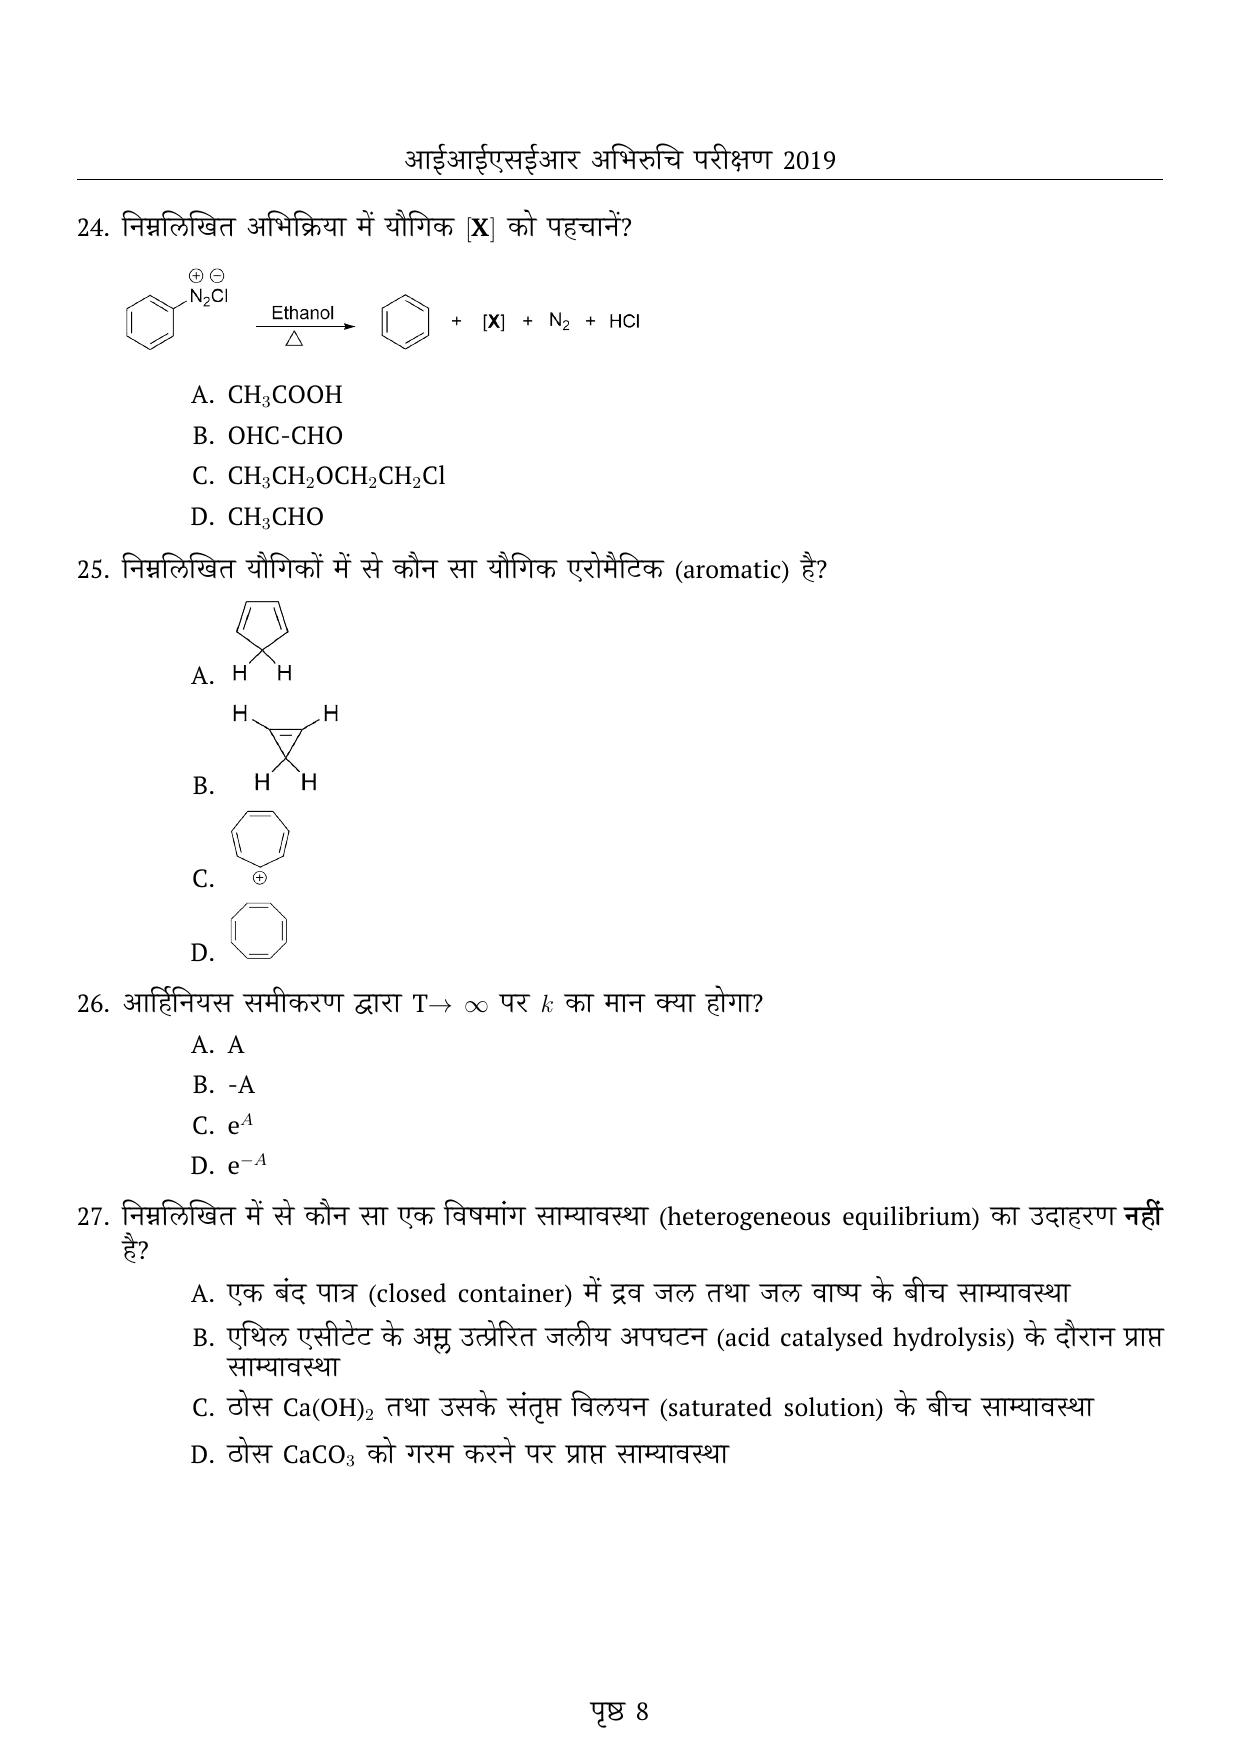 IISER Aptitude Test 2019 Hindi Question Paper - Page 8